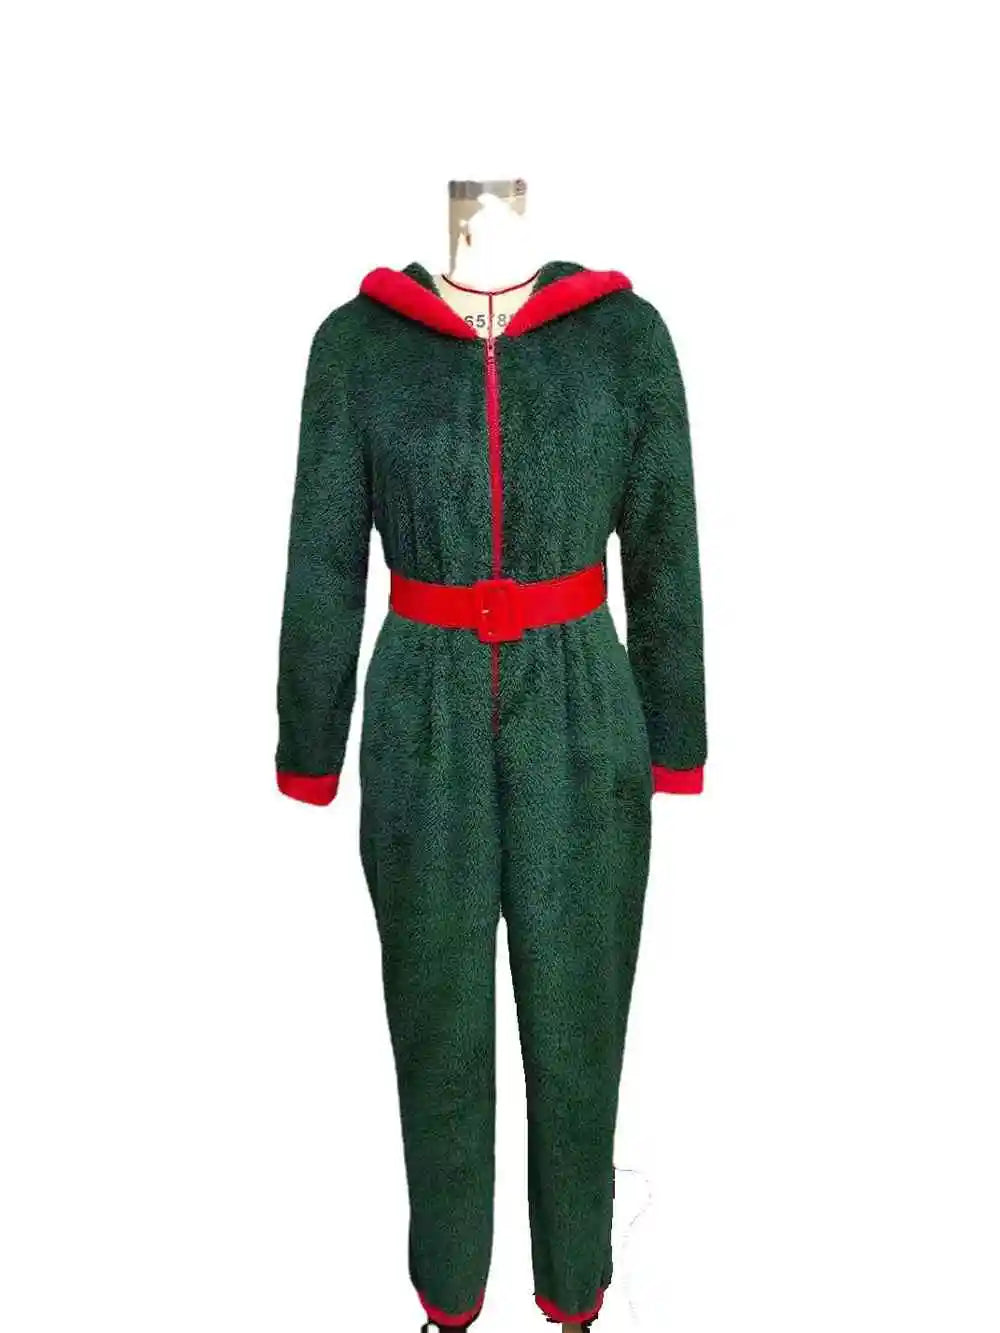 Cosy Green Christmas Onesie - Winter Warmth Meets Festive Style